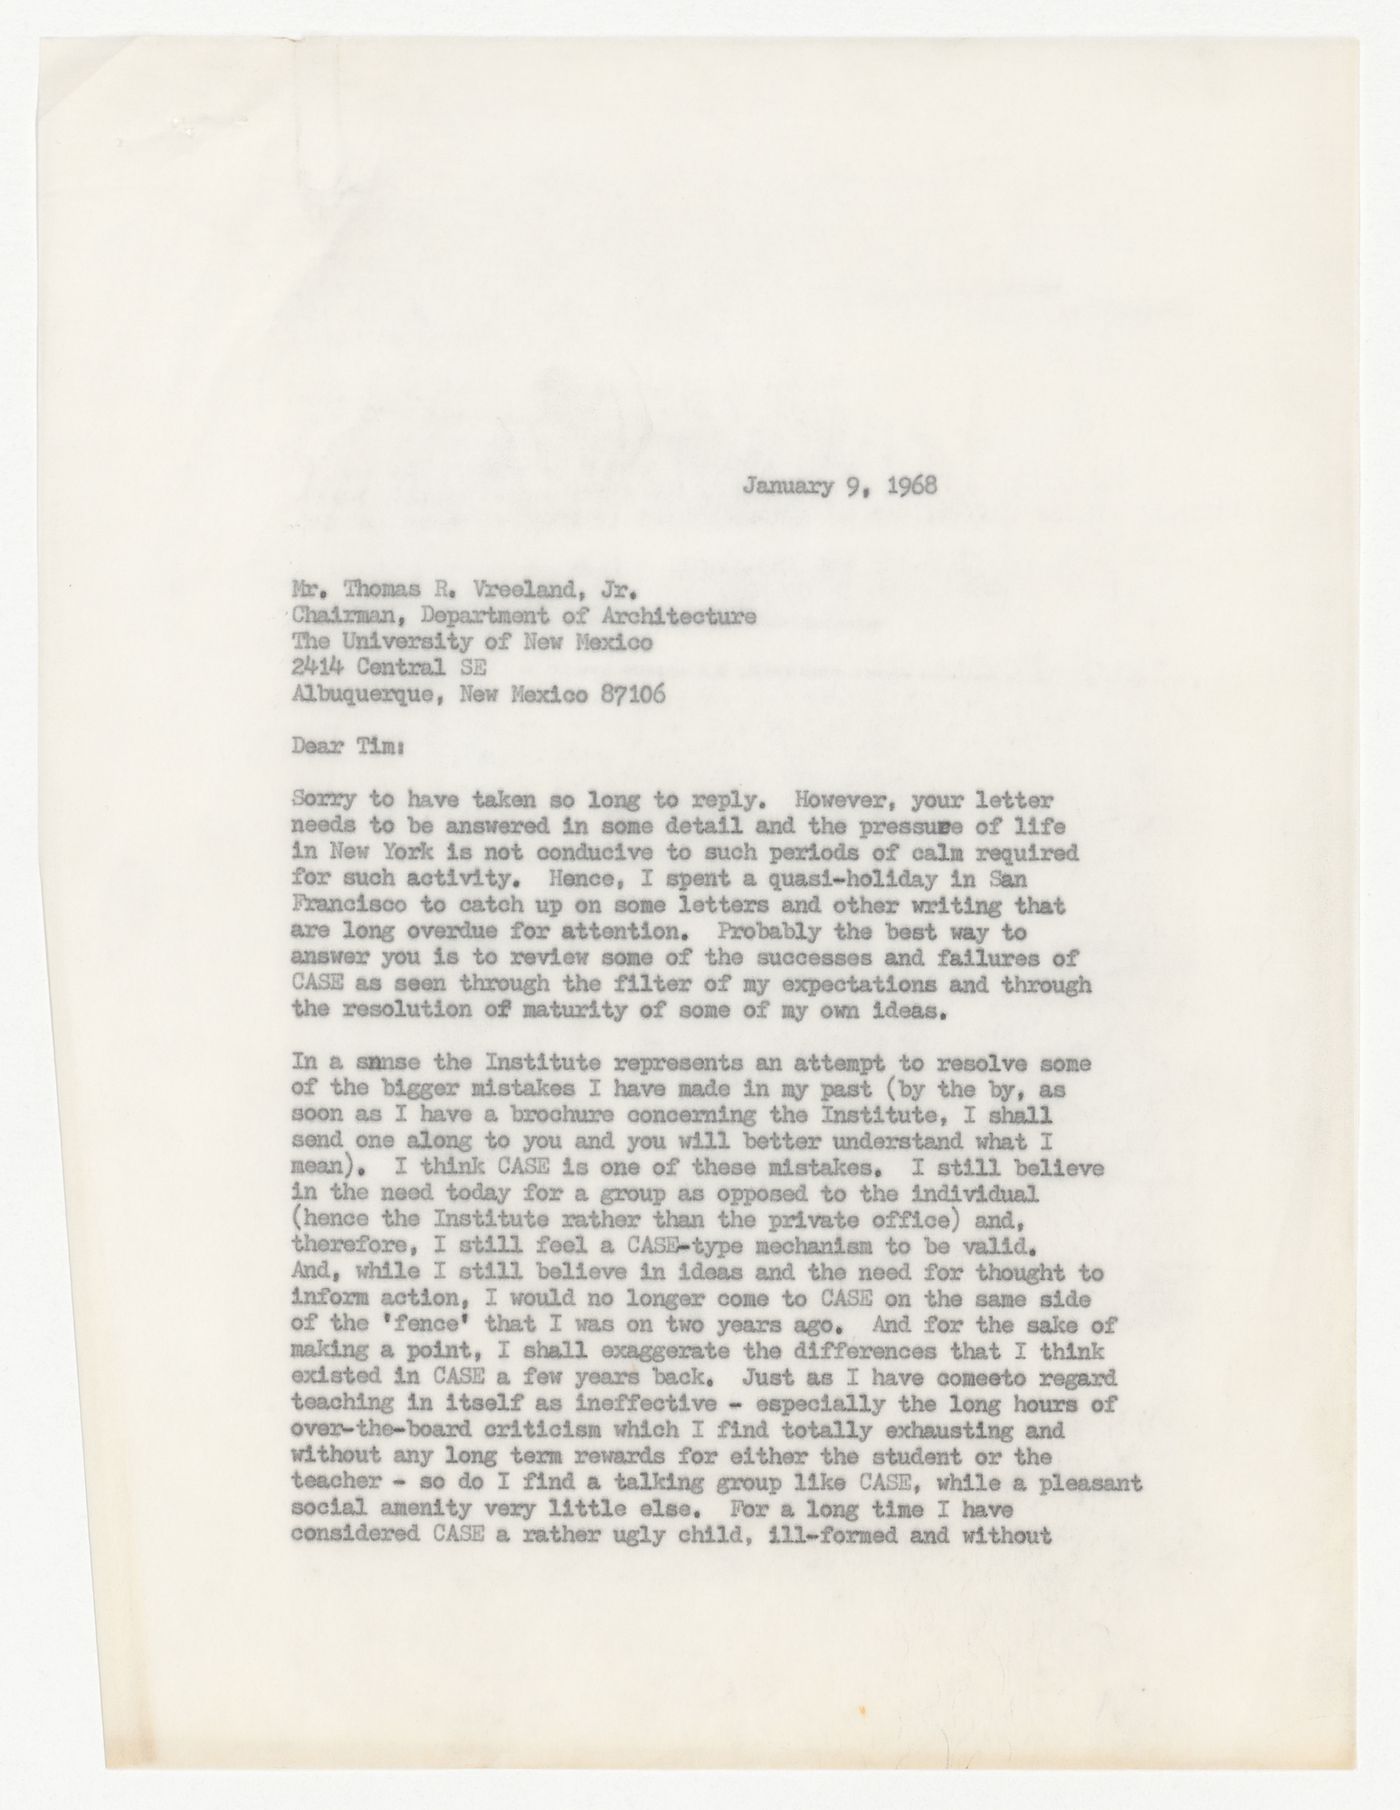 Letter from Peter D. Eisenman to Thomas R. Vreeland Jr about the Conference of Architects for the Study of the Environment (CASE)